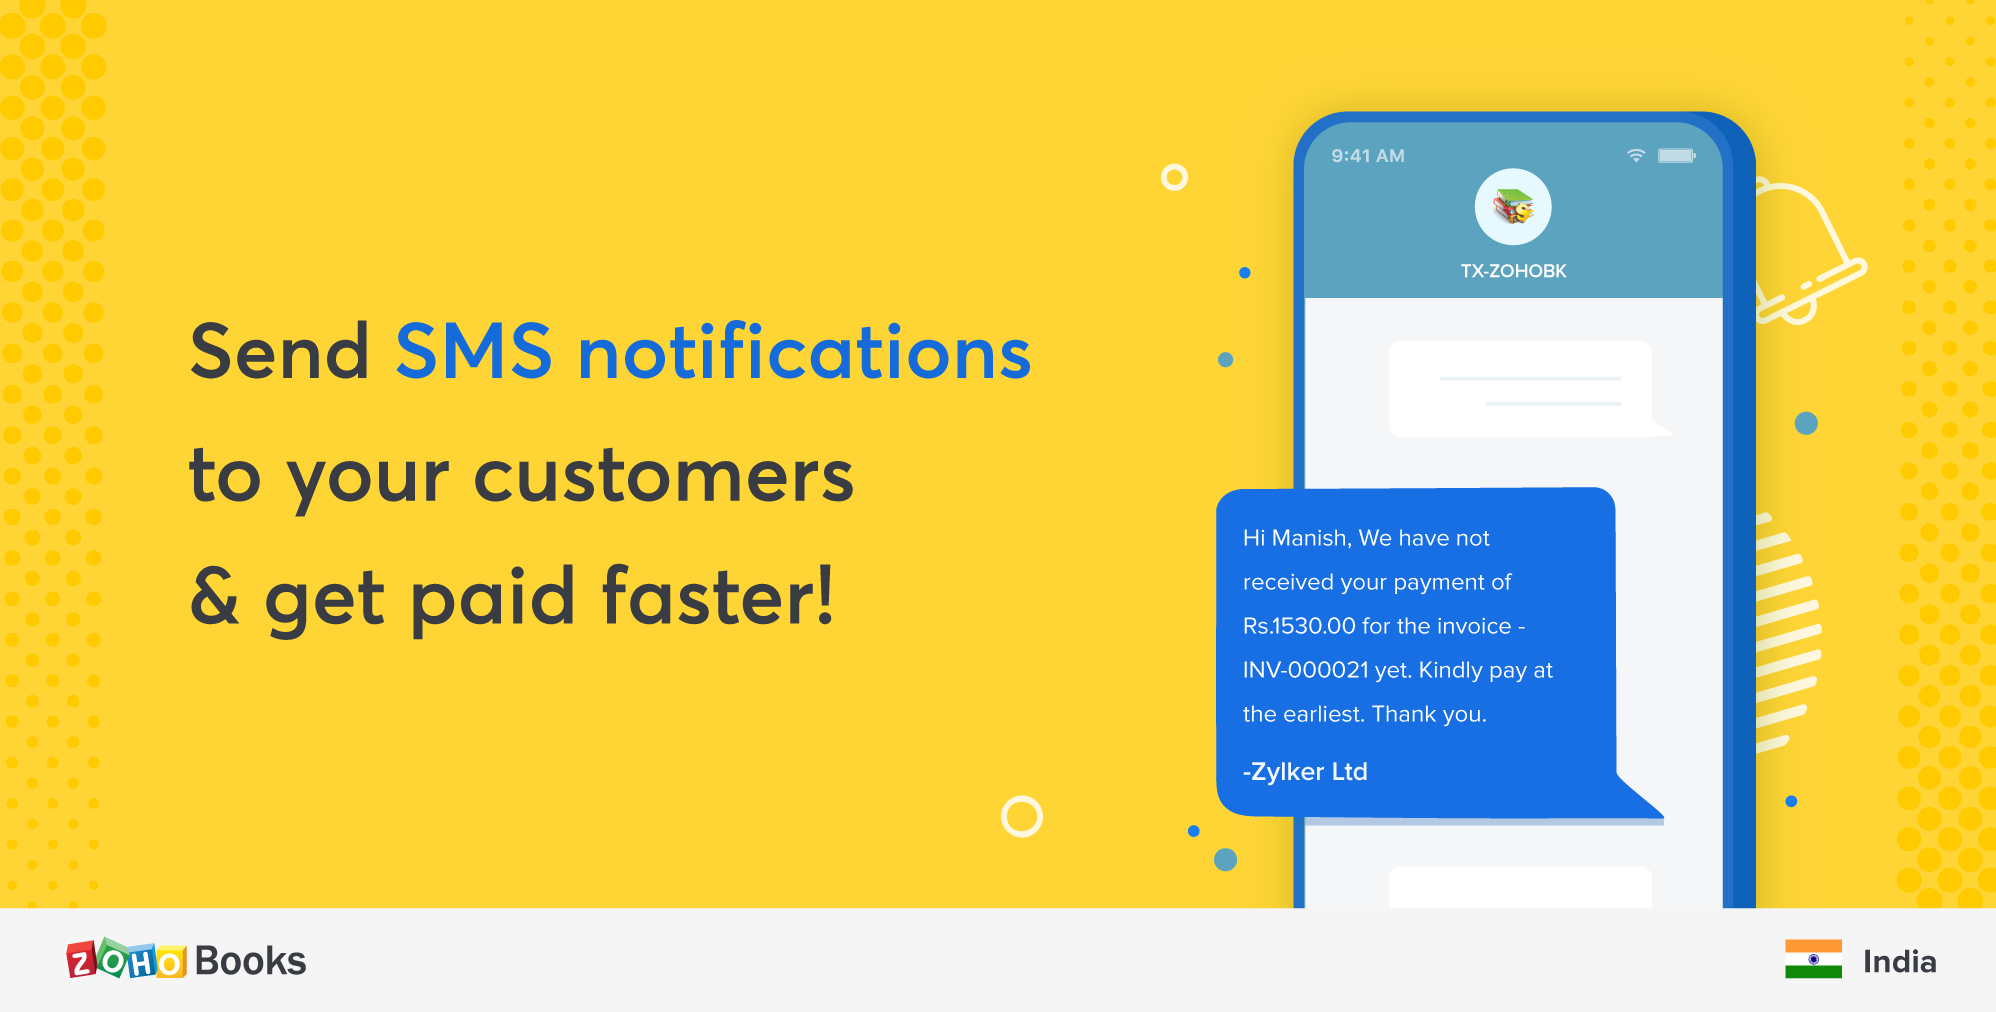 Introducing SMS notifications to collect payments faster